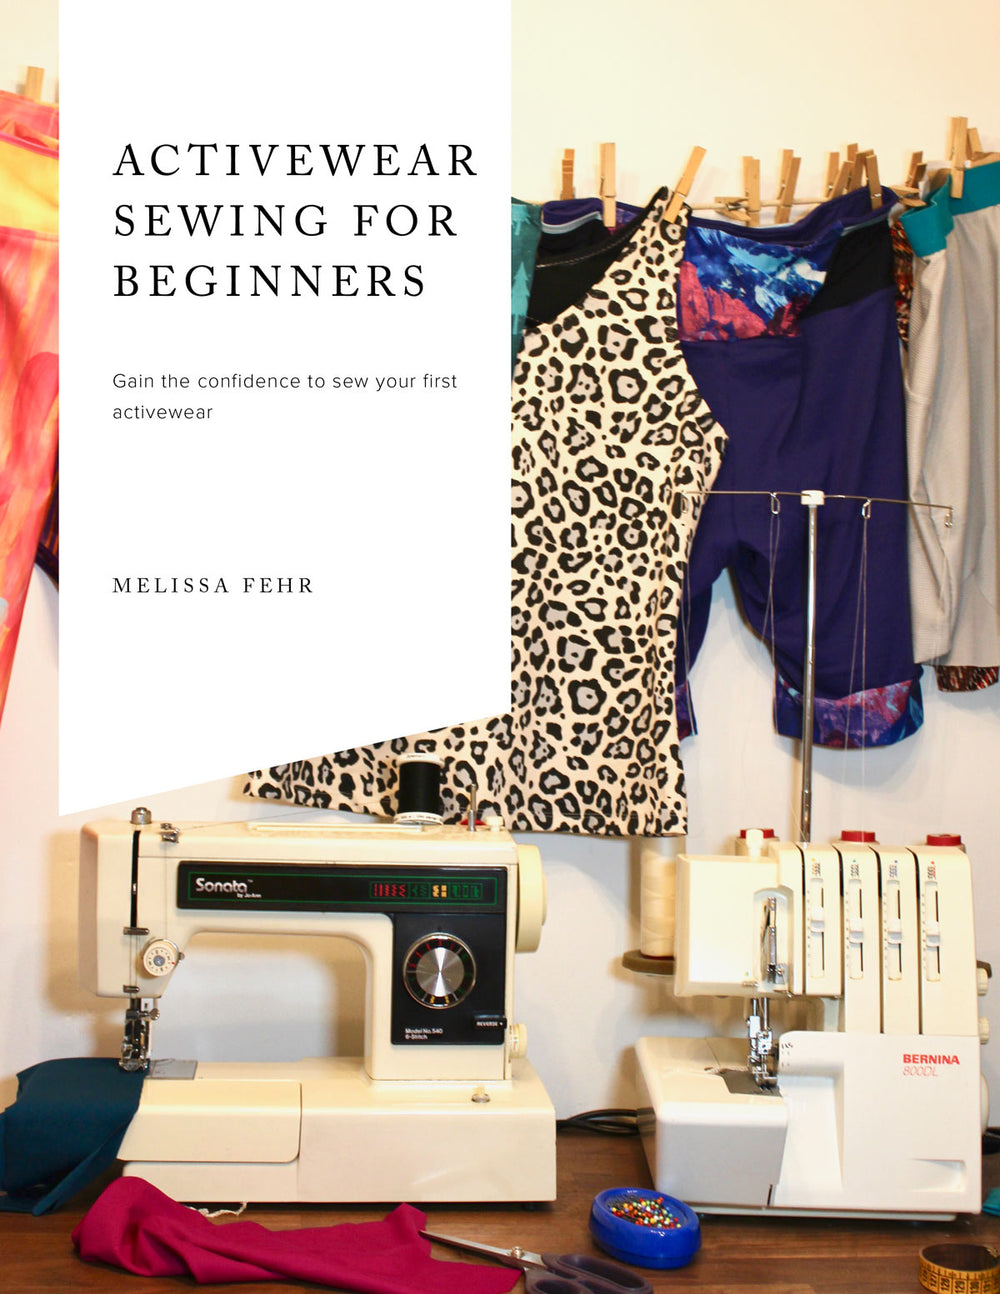 Fehr Trade Activewear Sewing for Beginners E-book